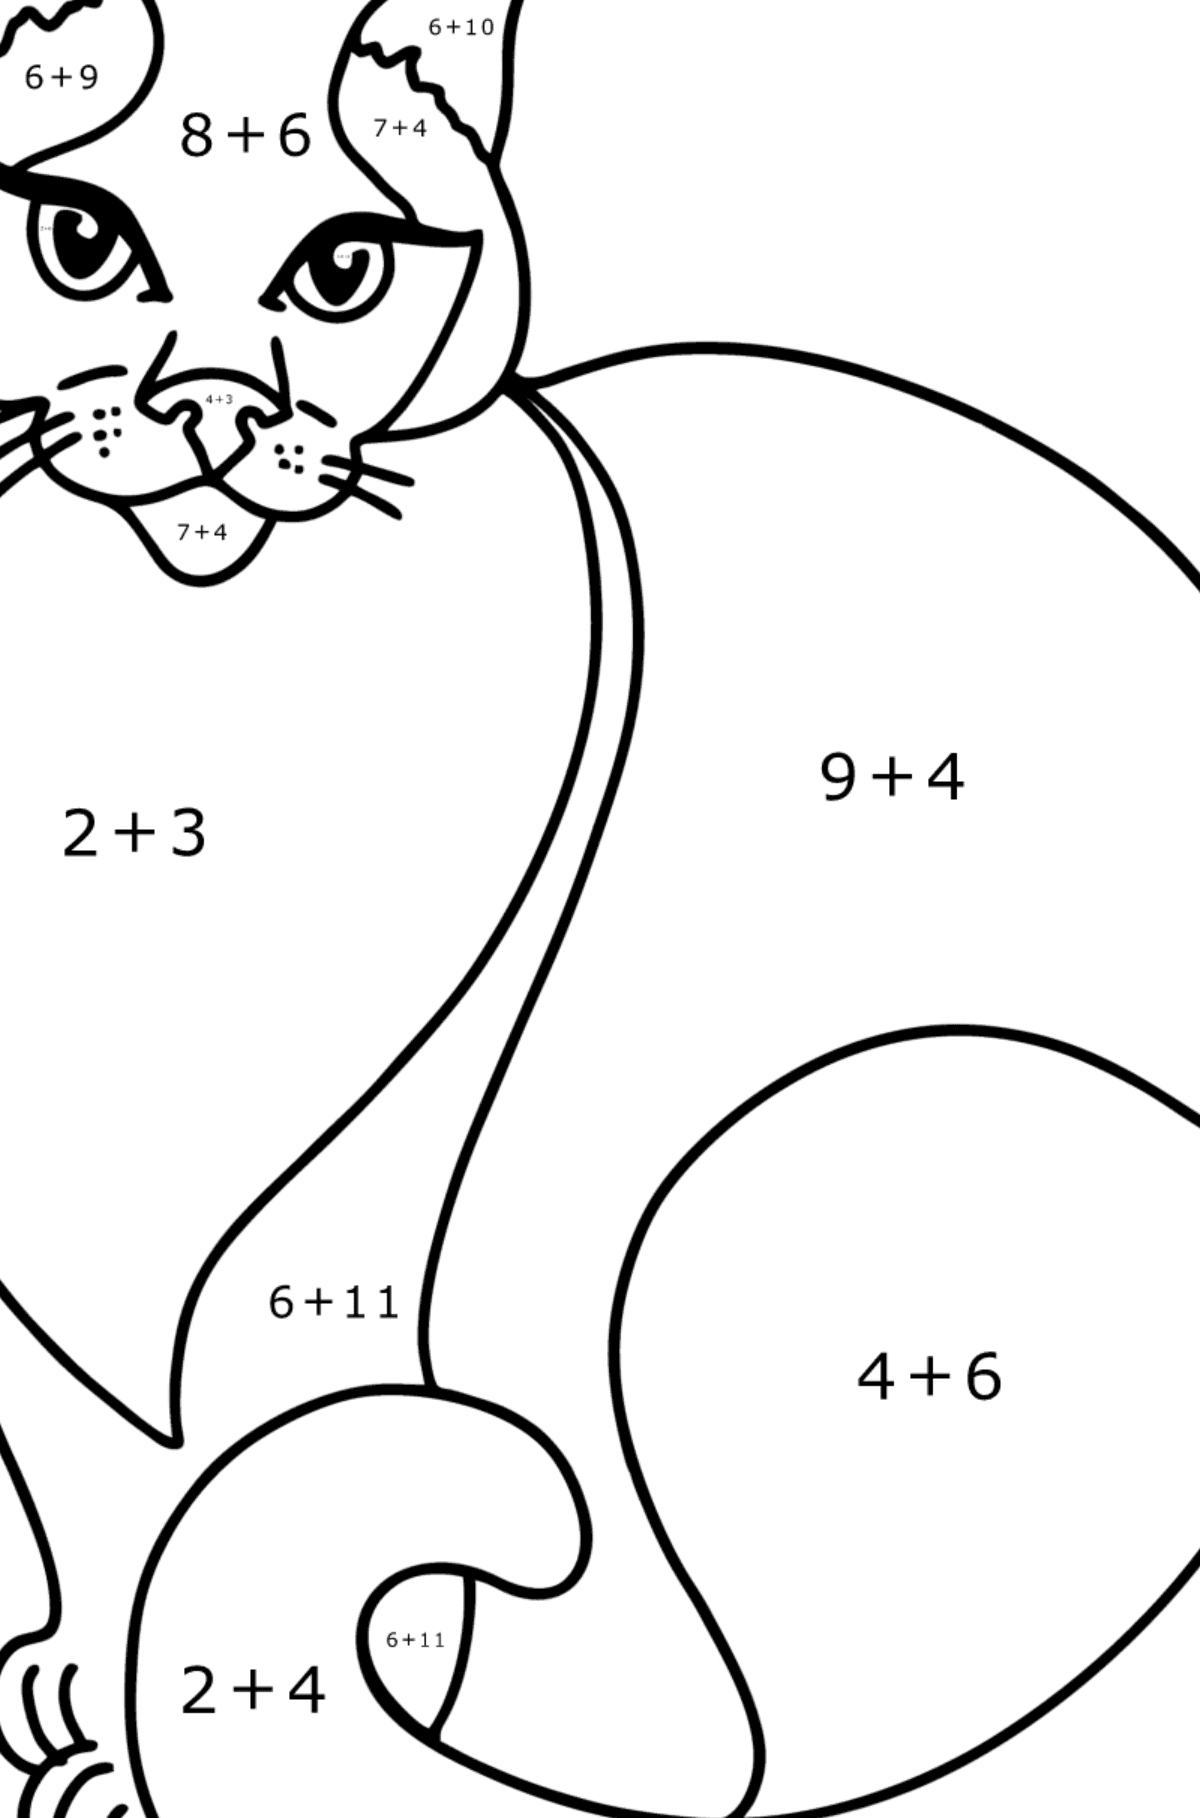 Siamese Cat coloring page - Math Coloring - Addition for Kids